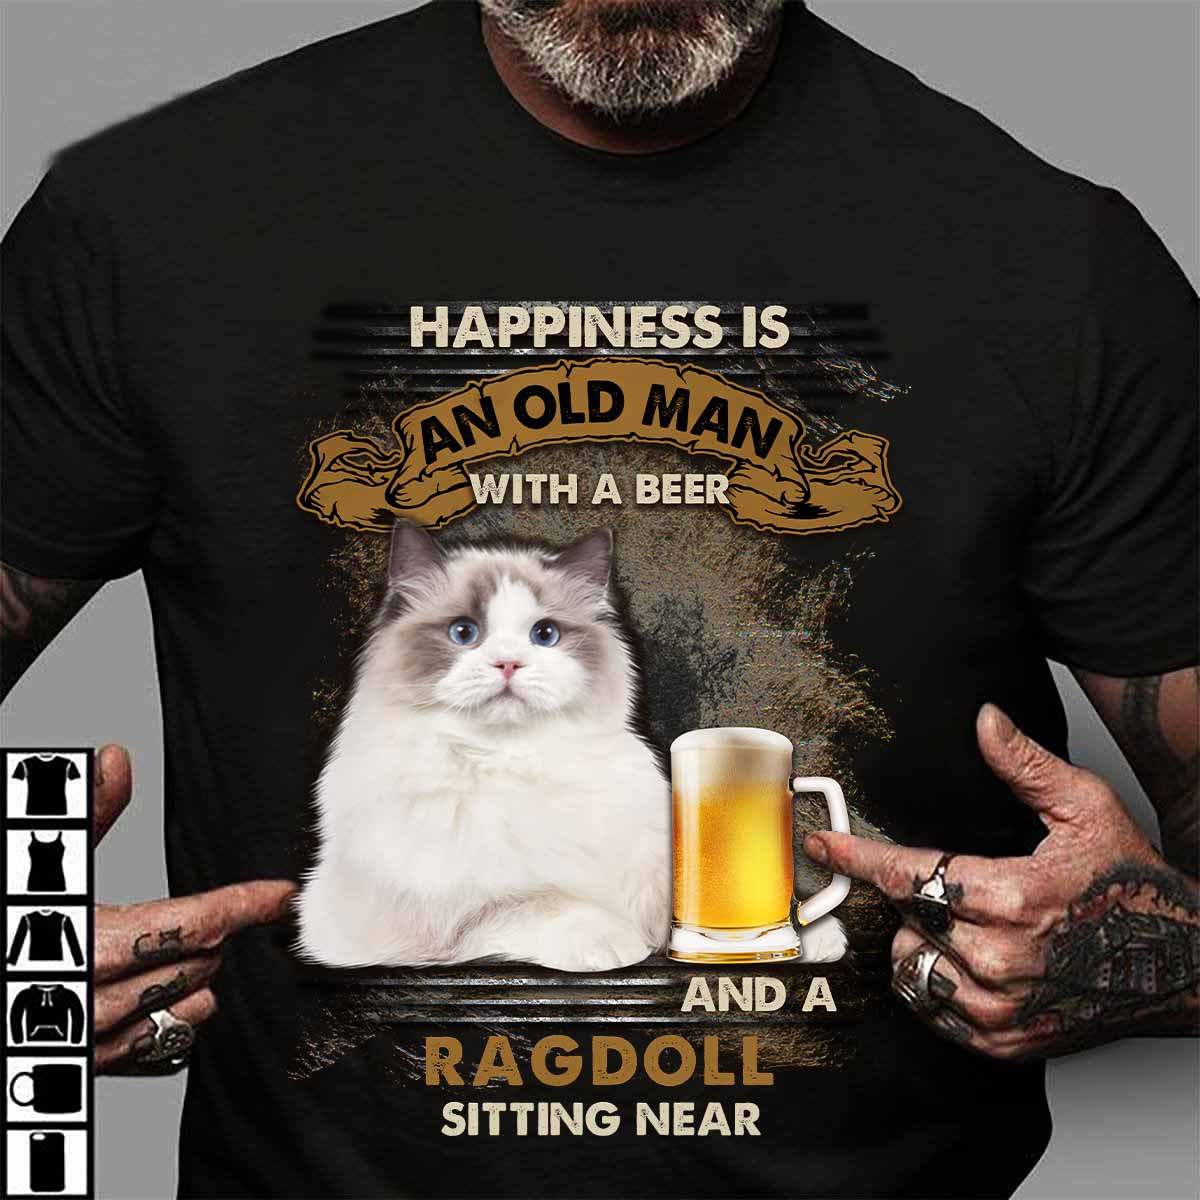 Happiness is an old man with a beer and a Ragdoll sitting near - Ragdoll cat